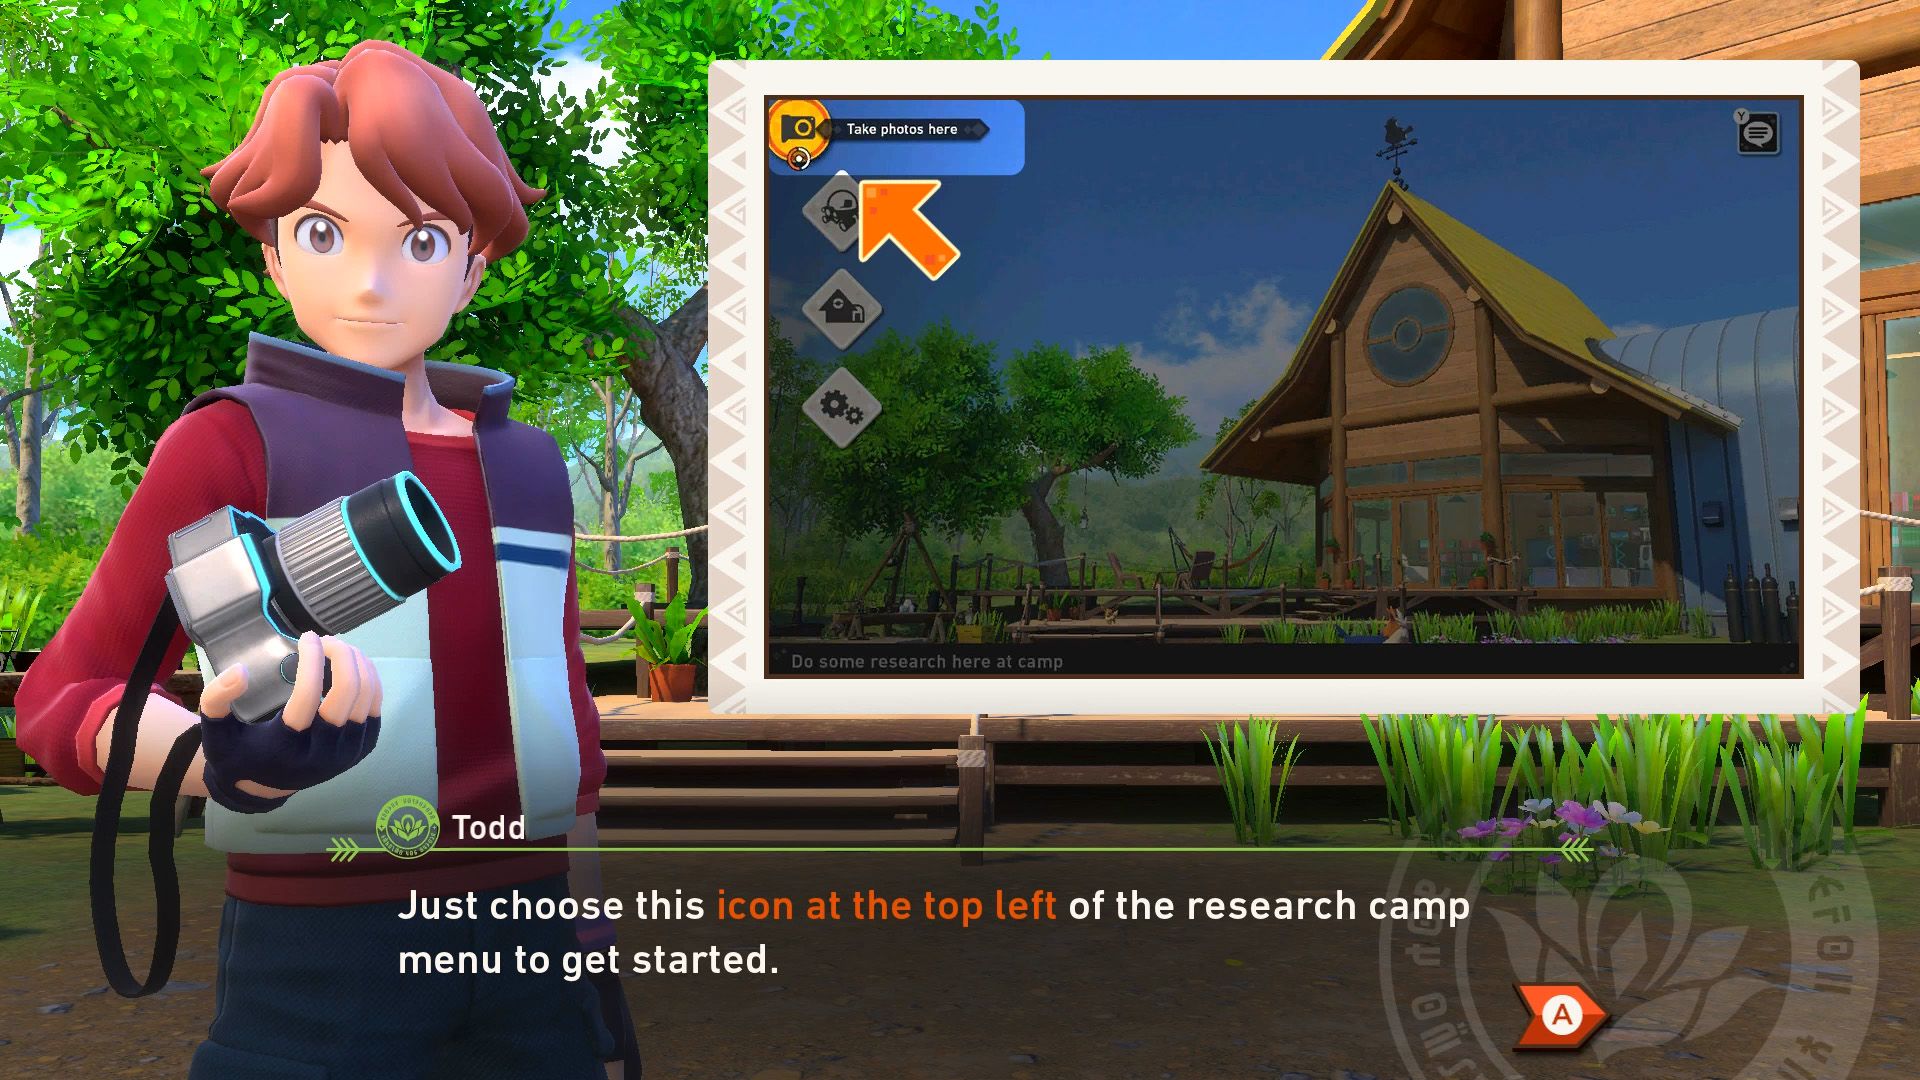 Research Camp in New Pokemon Snap